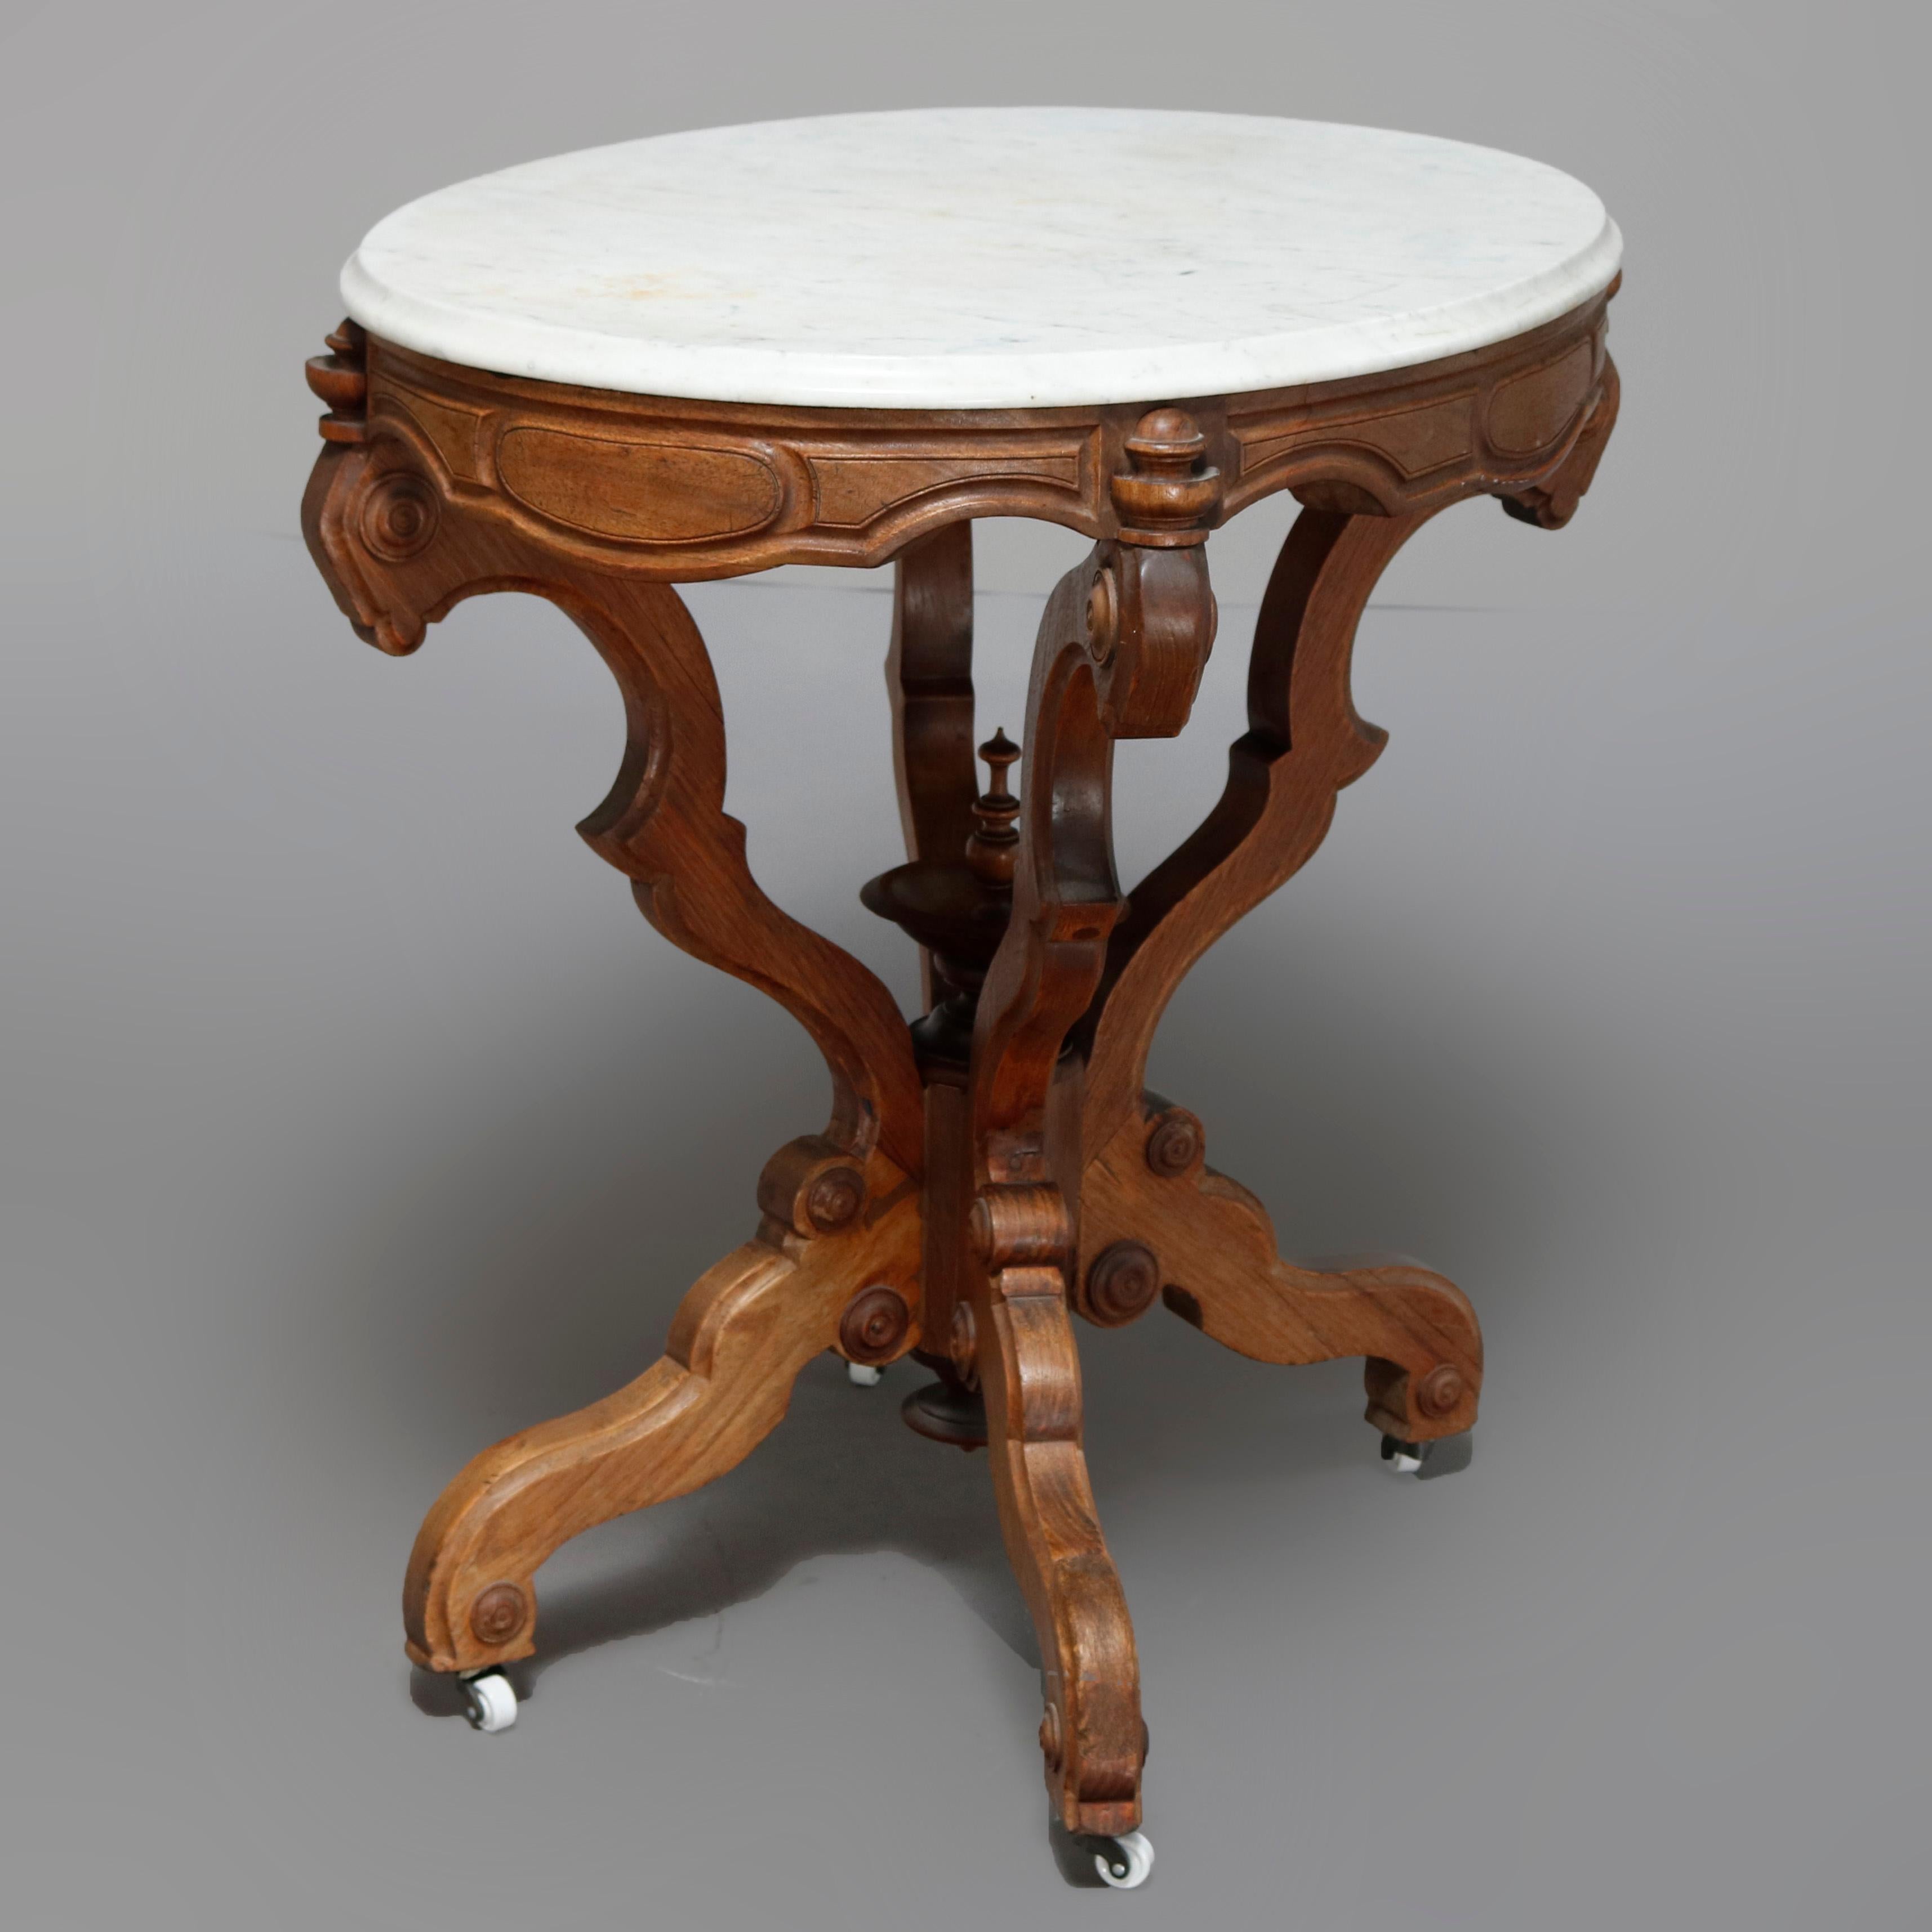 An antique Victorian Eastlake side table offers a beveled oval marble top surmounting carved walnut frame having paneled skirt raised on s-scroll legs and central urn form finial, circa 1880

***DELIVERY NOTICE – Due to COVID-19 we have employed